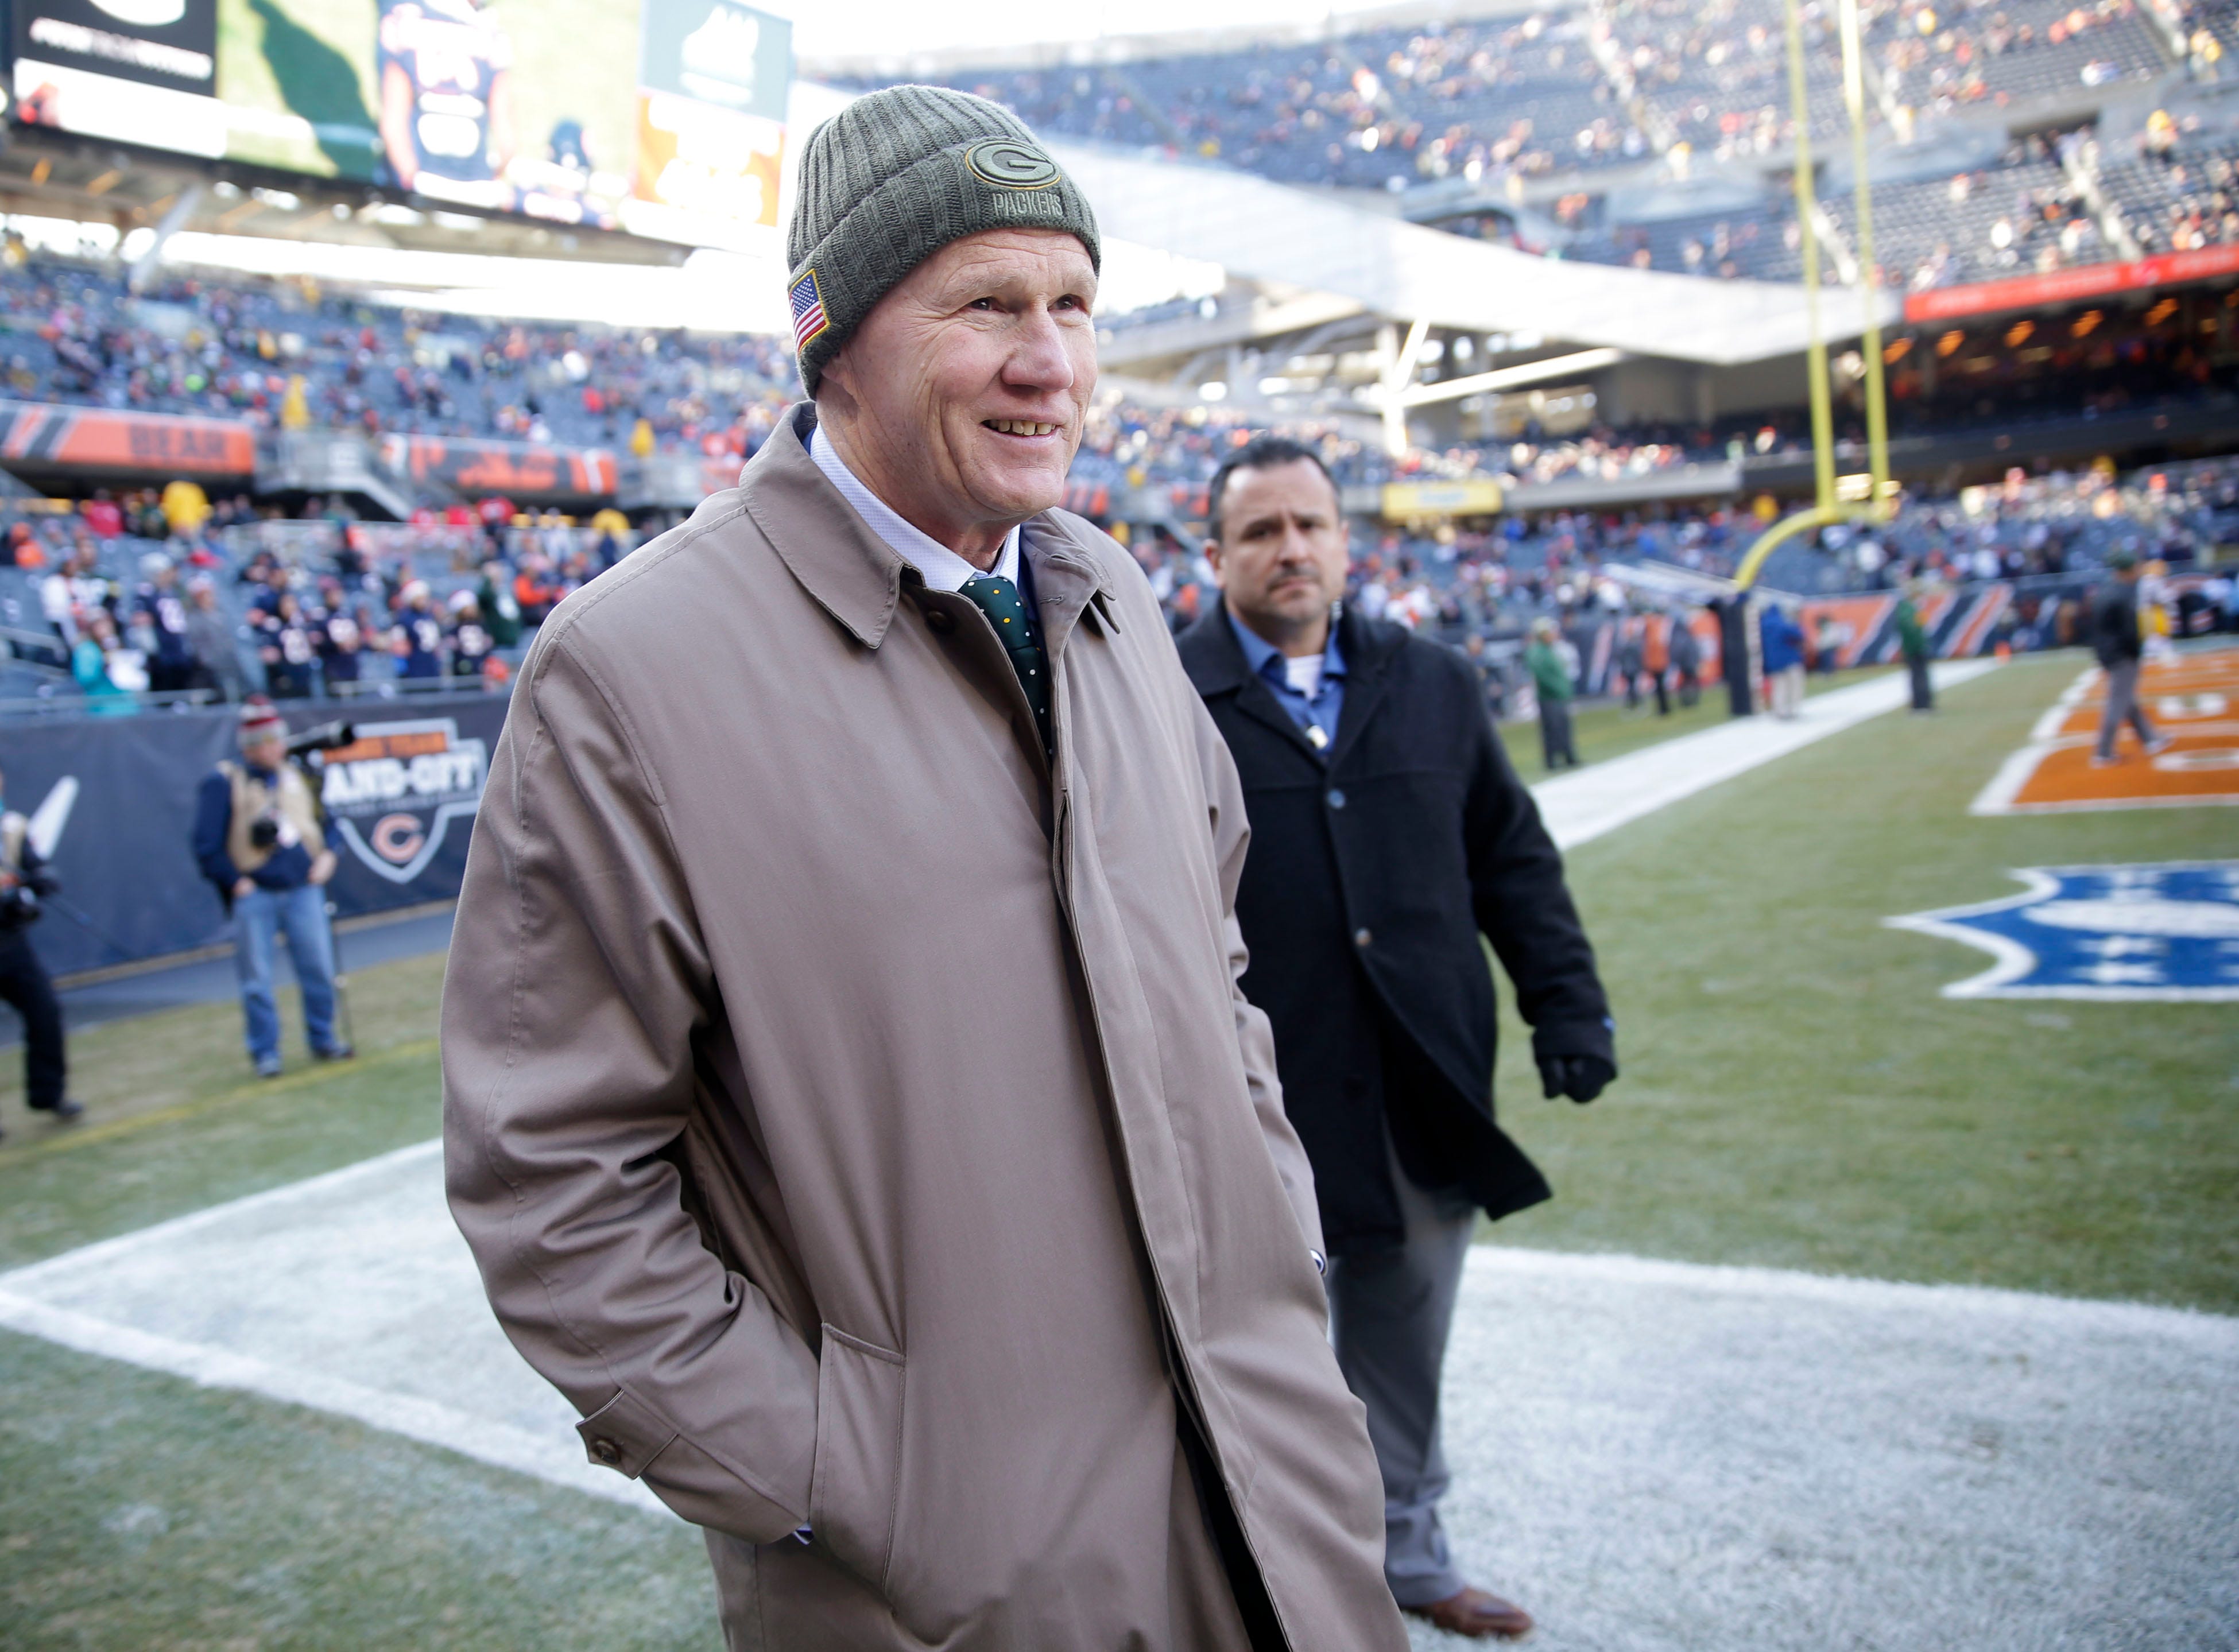 Green Bay Packers president Mark Murphy walks on the filed before the Green Bay Packers game against the Chicago Bears at Soldier Field Sunday, Dec. 16, 2018, in Chicago.